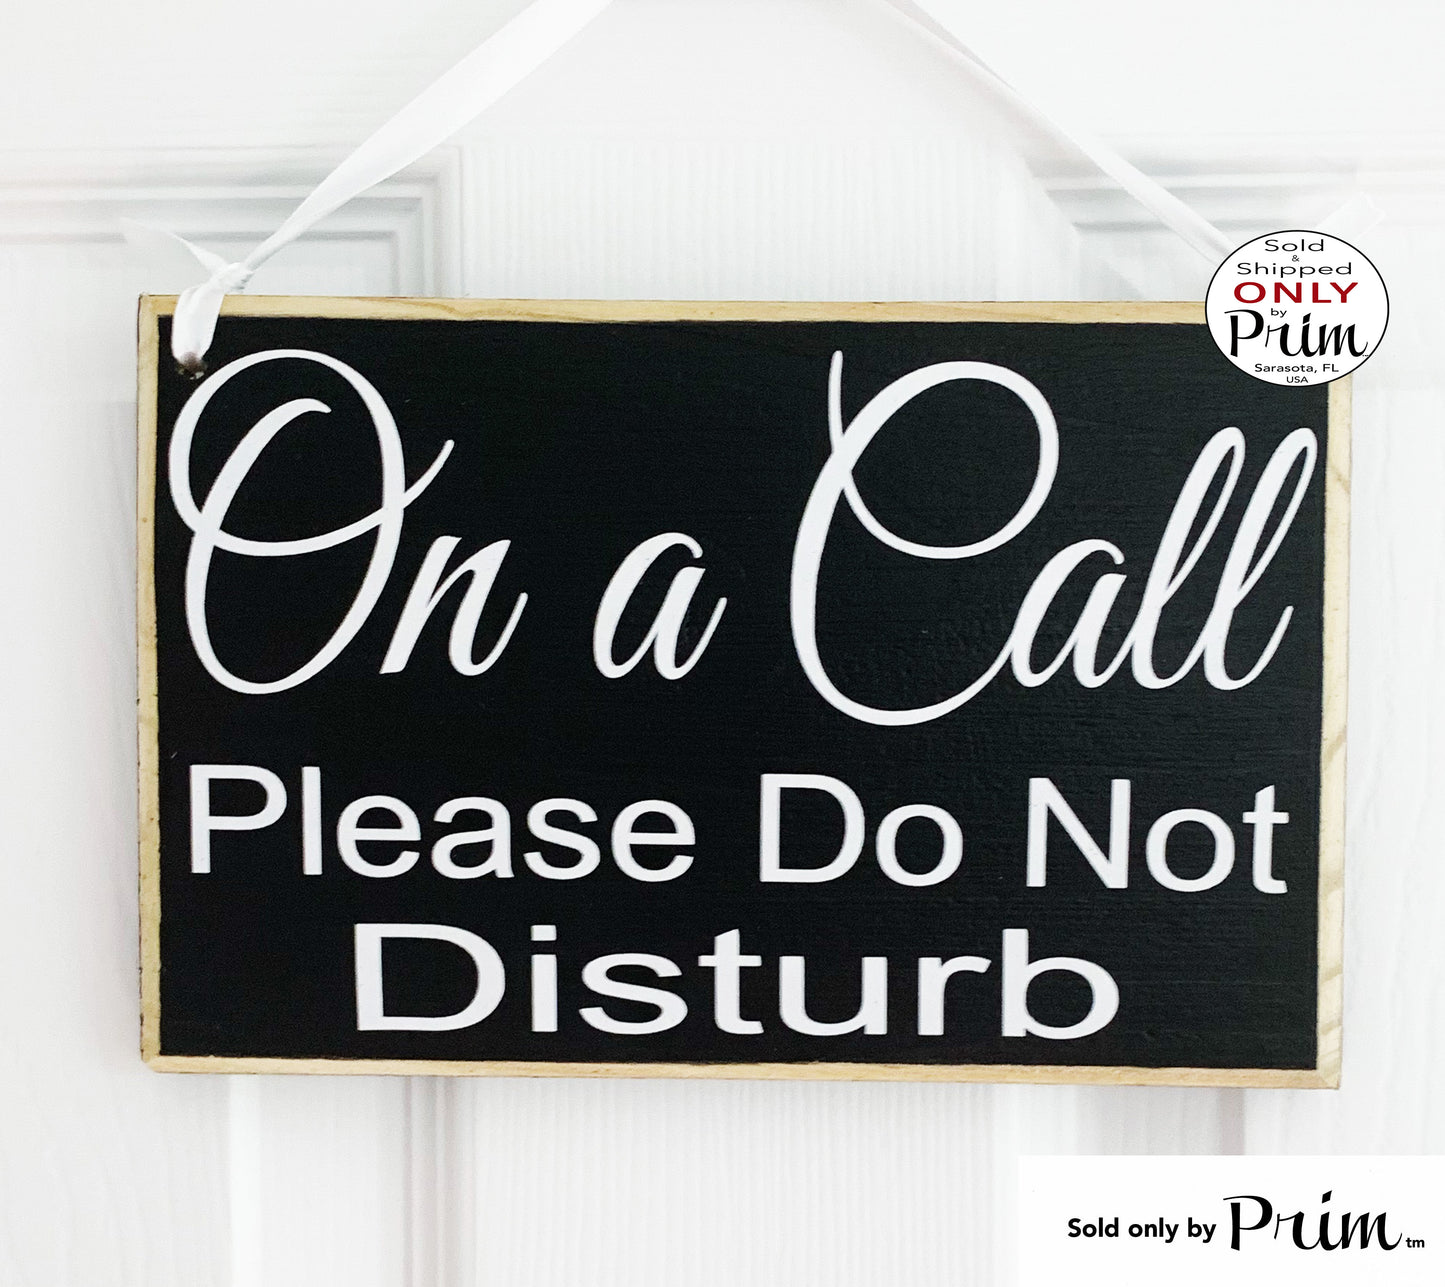 Designs by Prim 8x6 On a Call Soft Voices Please Custom Wood Sign Meeting Please Do Not Disturb Home Office Working Busy In Session Virtual Door Plaque